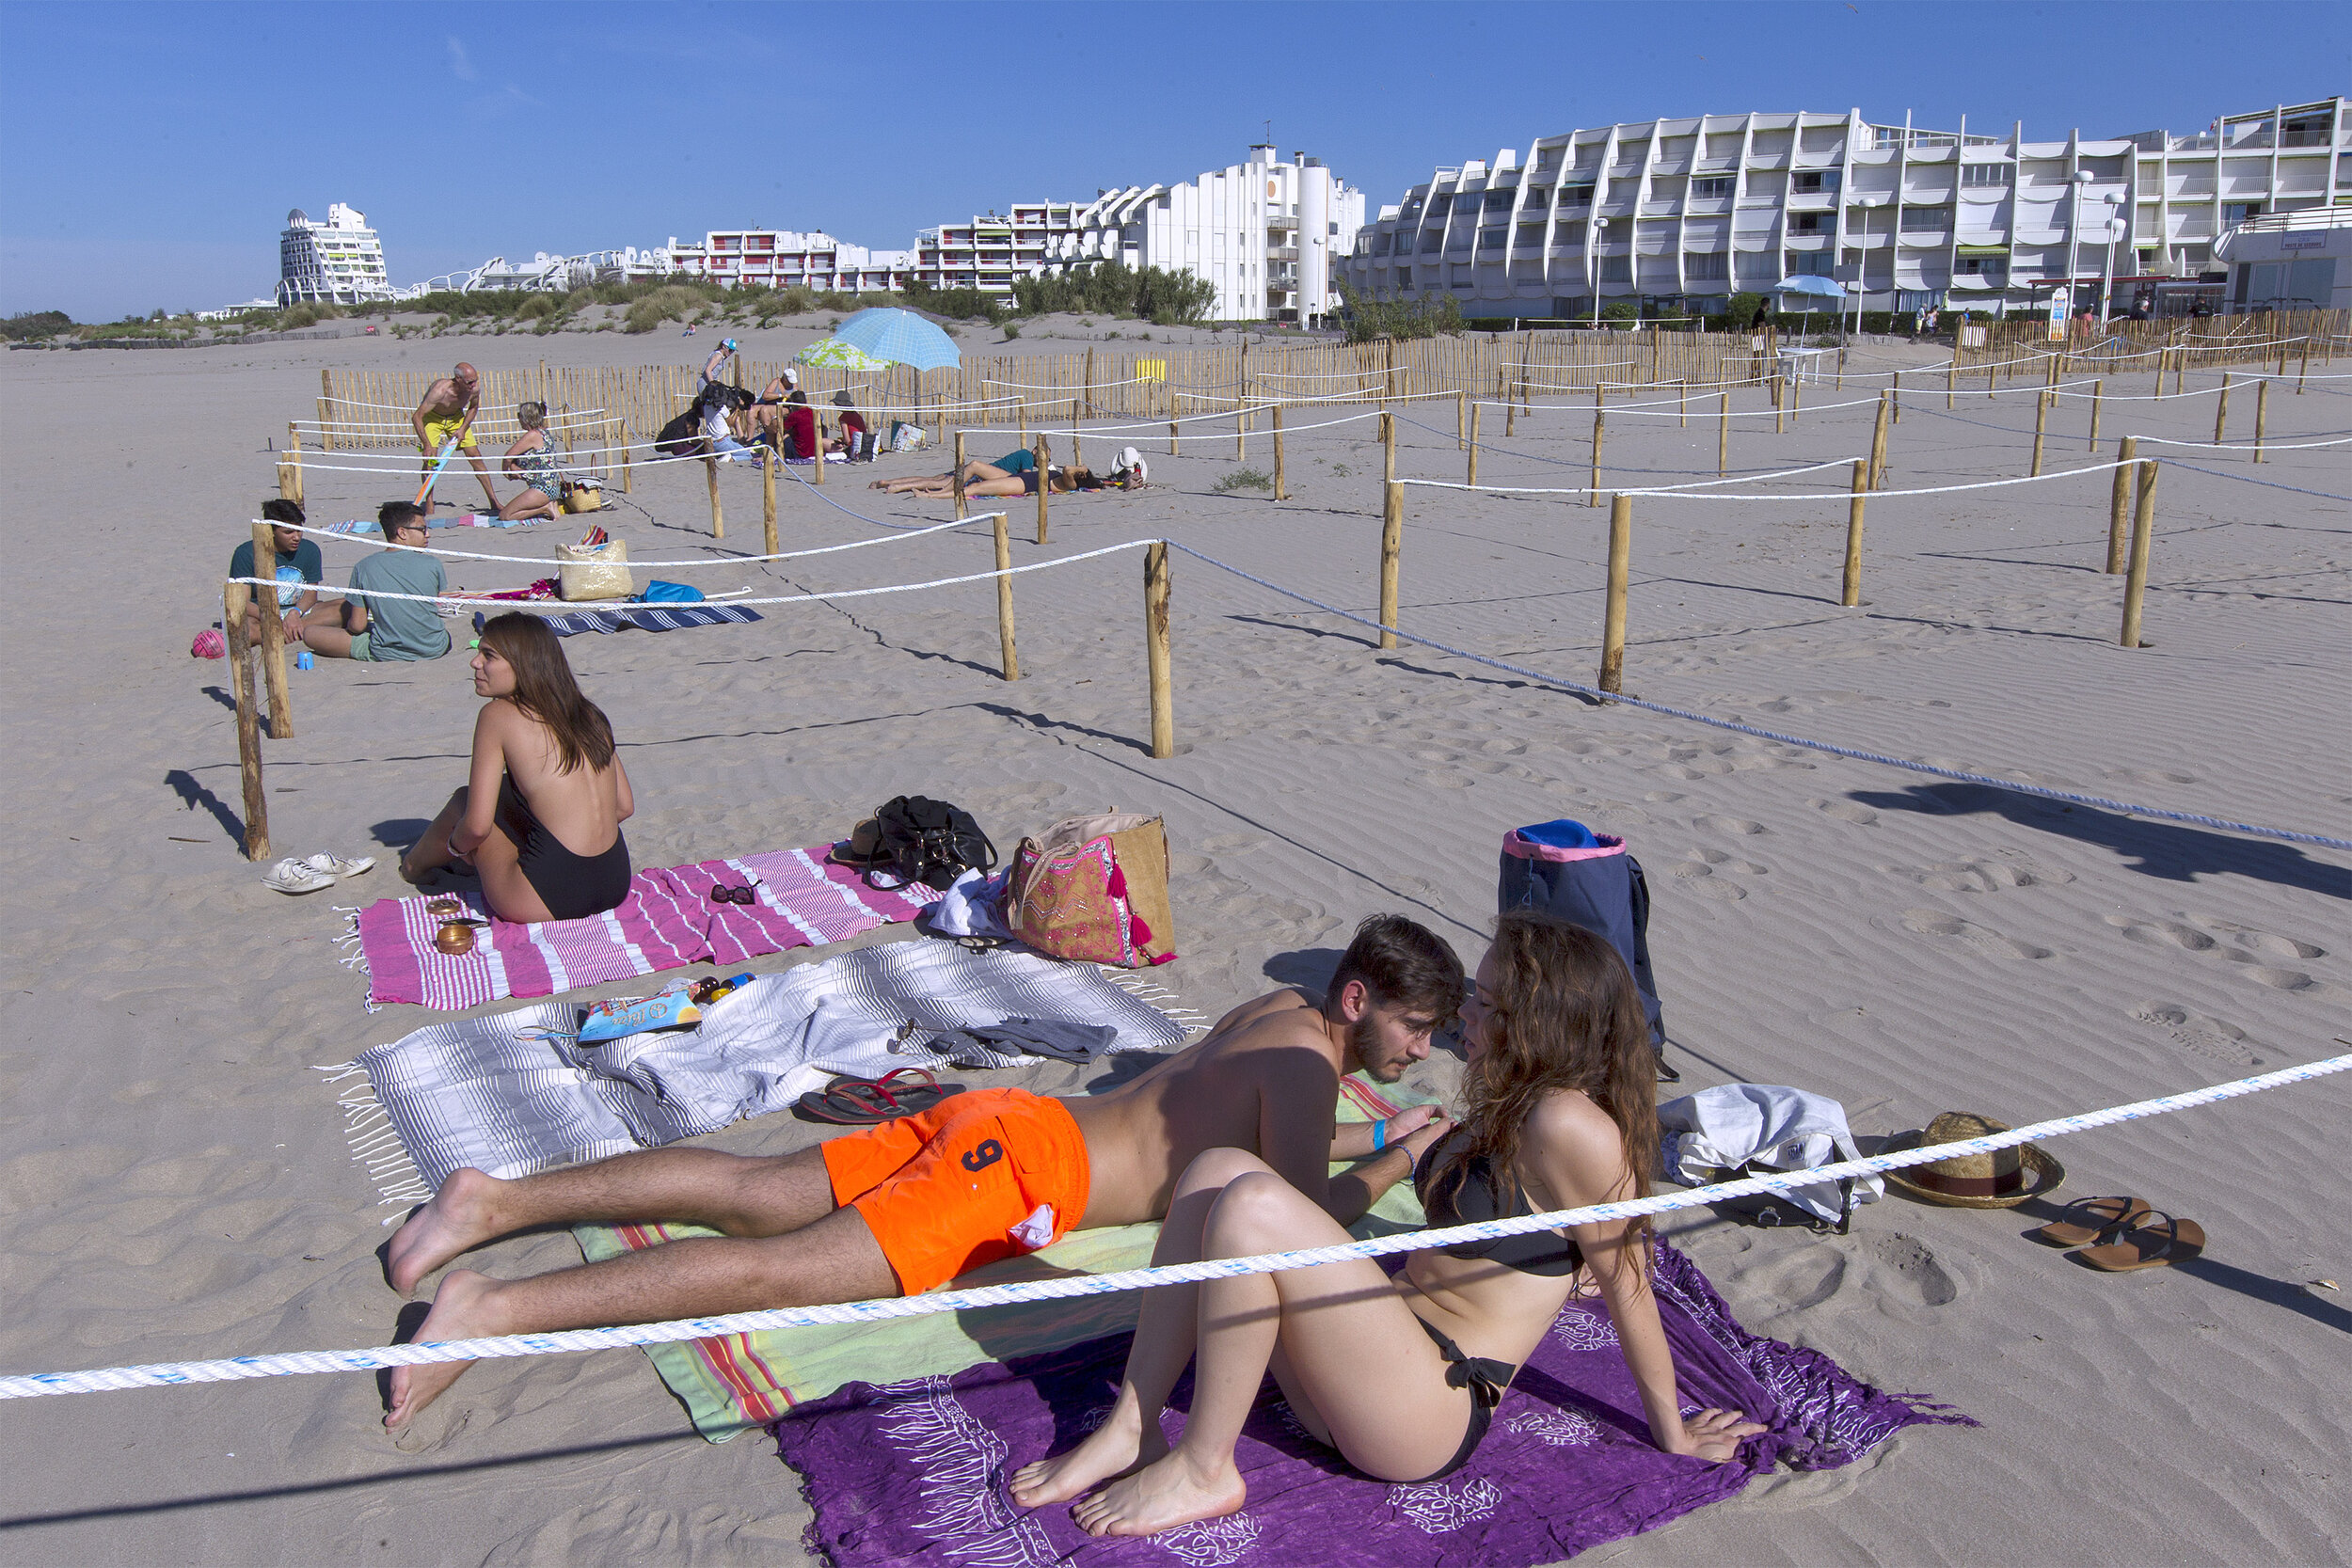   © Guillaume Bonnefont / IP3, La Grande Motte, France on May, 21, 2020. Opening of the first shared beach in France where it is possible to lie on your towel in passive mode. The town of La Grande Motte has set up a stretch of beach to respect the s